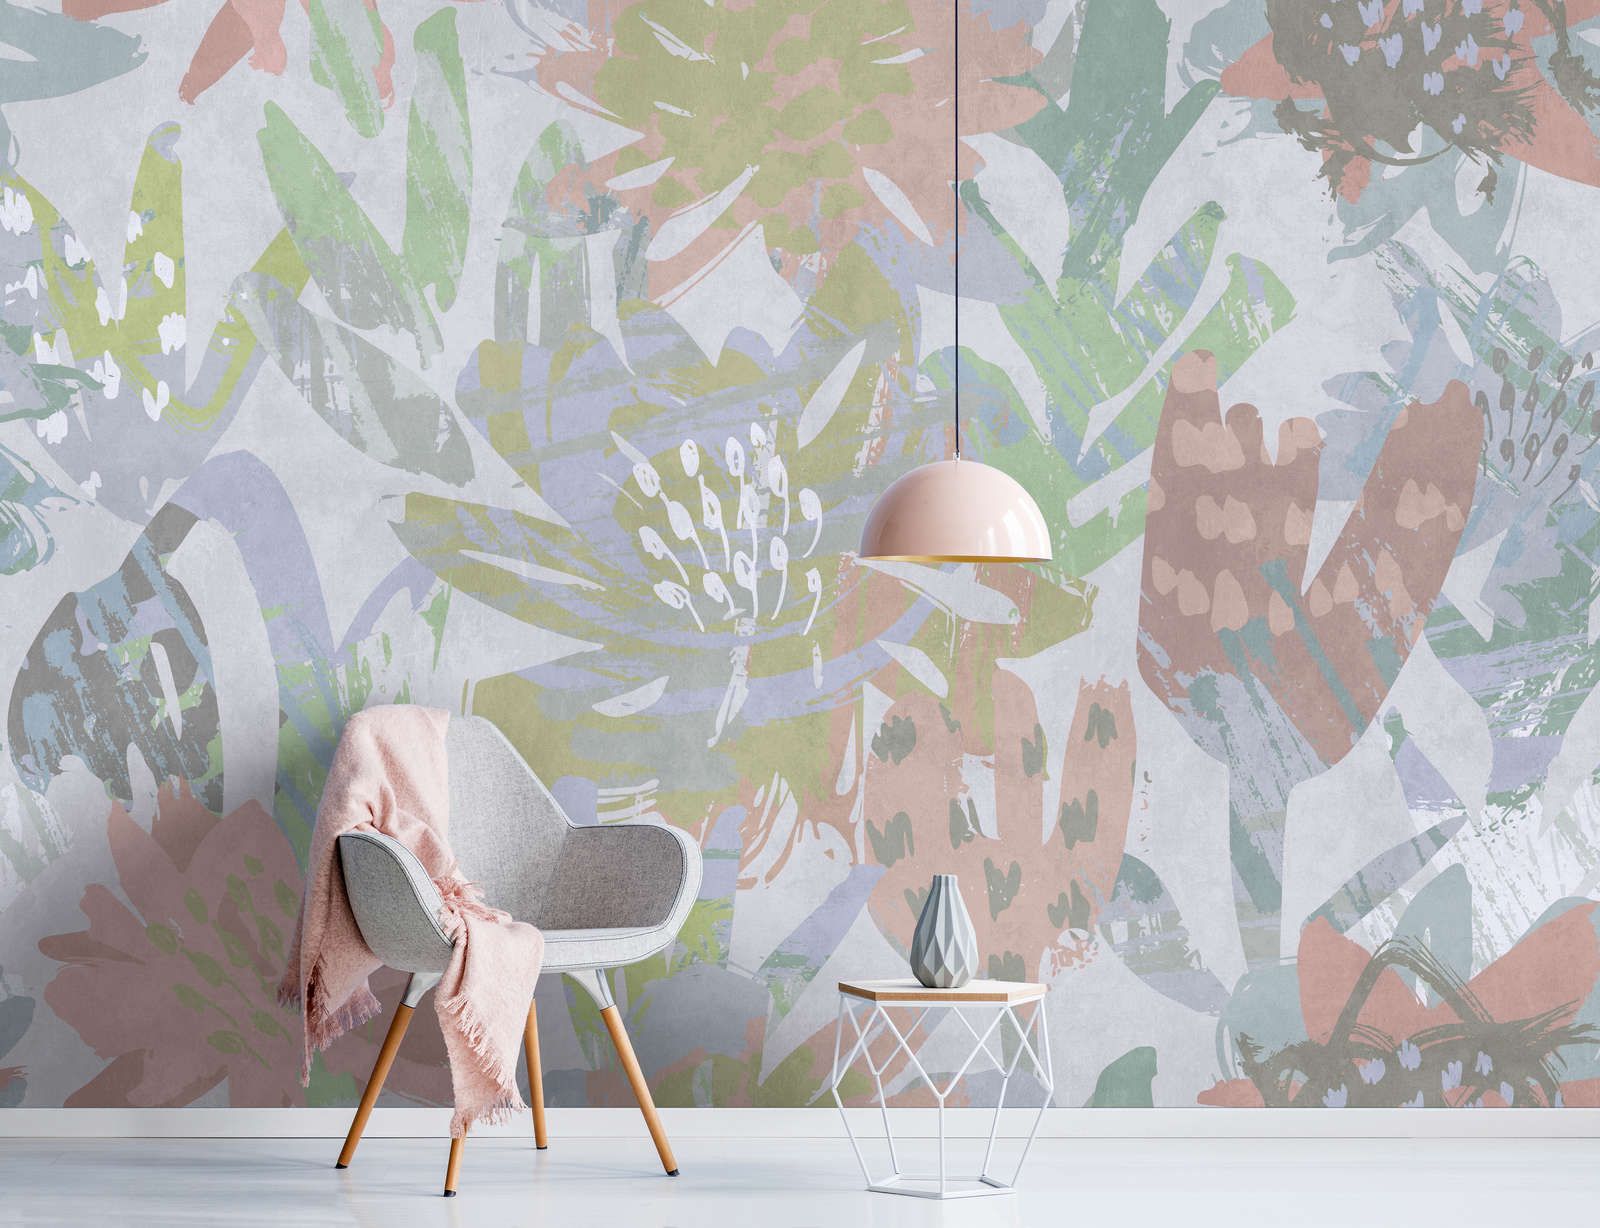             Photo wallpaper »sophia« - Colourful floral pattern on concrete plaster texture - Smooth, slightly shiny premium non-woven fabric
        